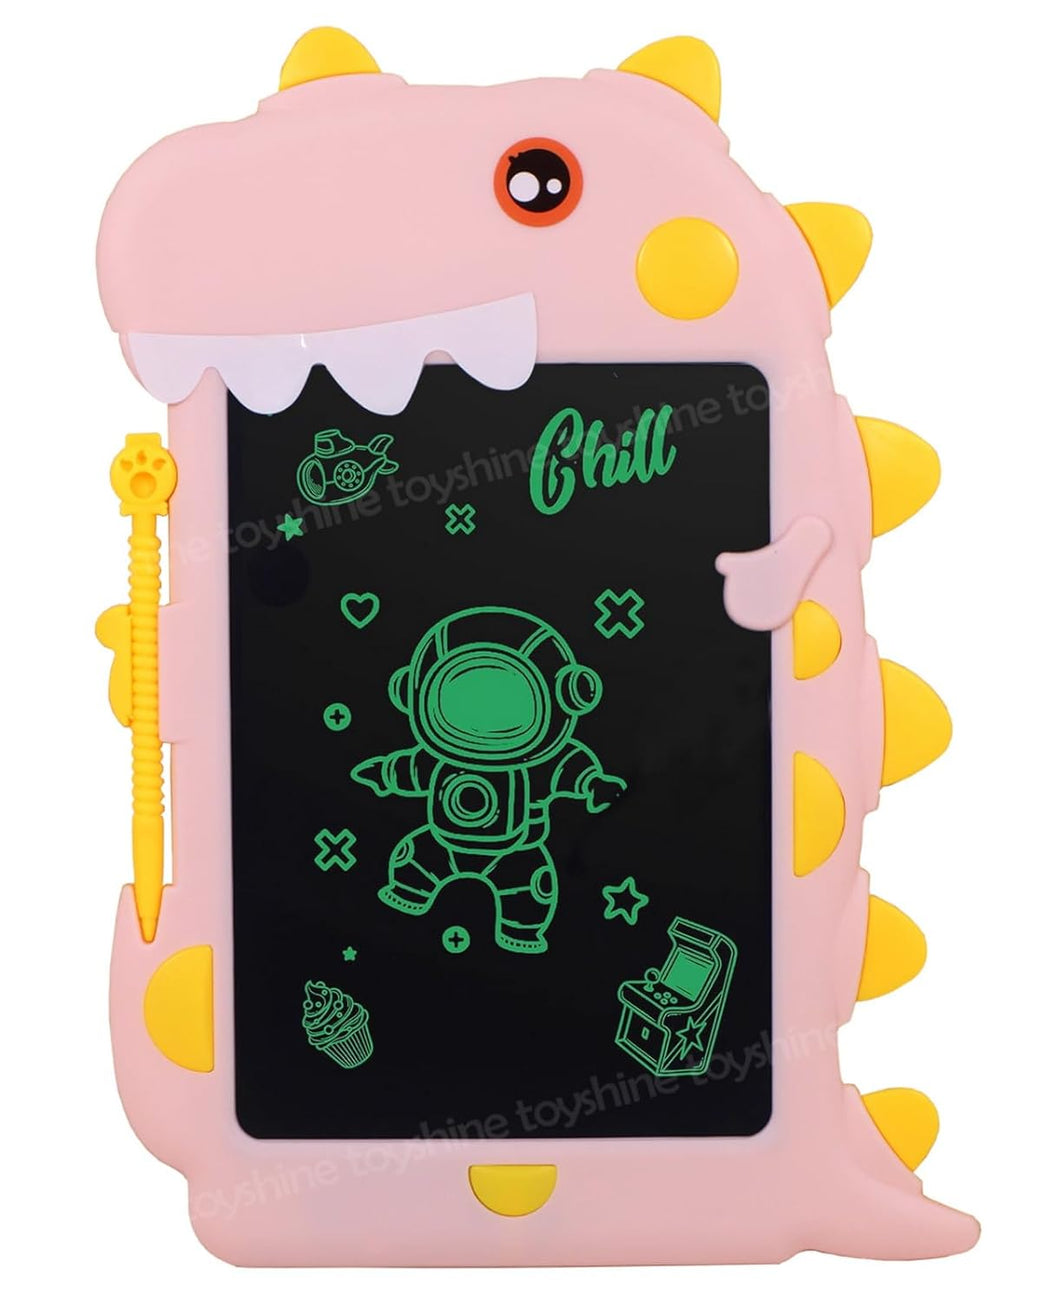 Toyshine Dinosaur Design Writing Tablet for Kids, 8.5 Inches LCD Tab for Kids Drawing Pad Doodle Board Scribble and Play for 3-10 Years Old Boys/Girls Gifts Education Learning Toys- Pink